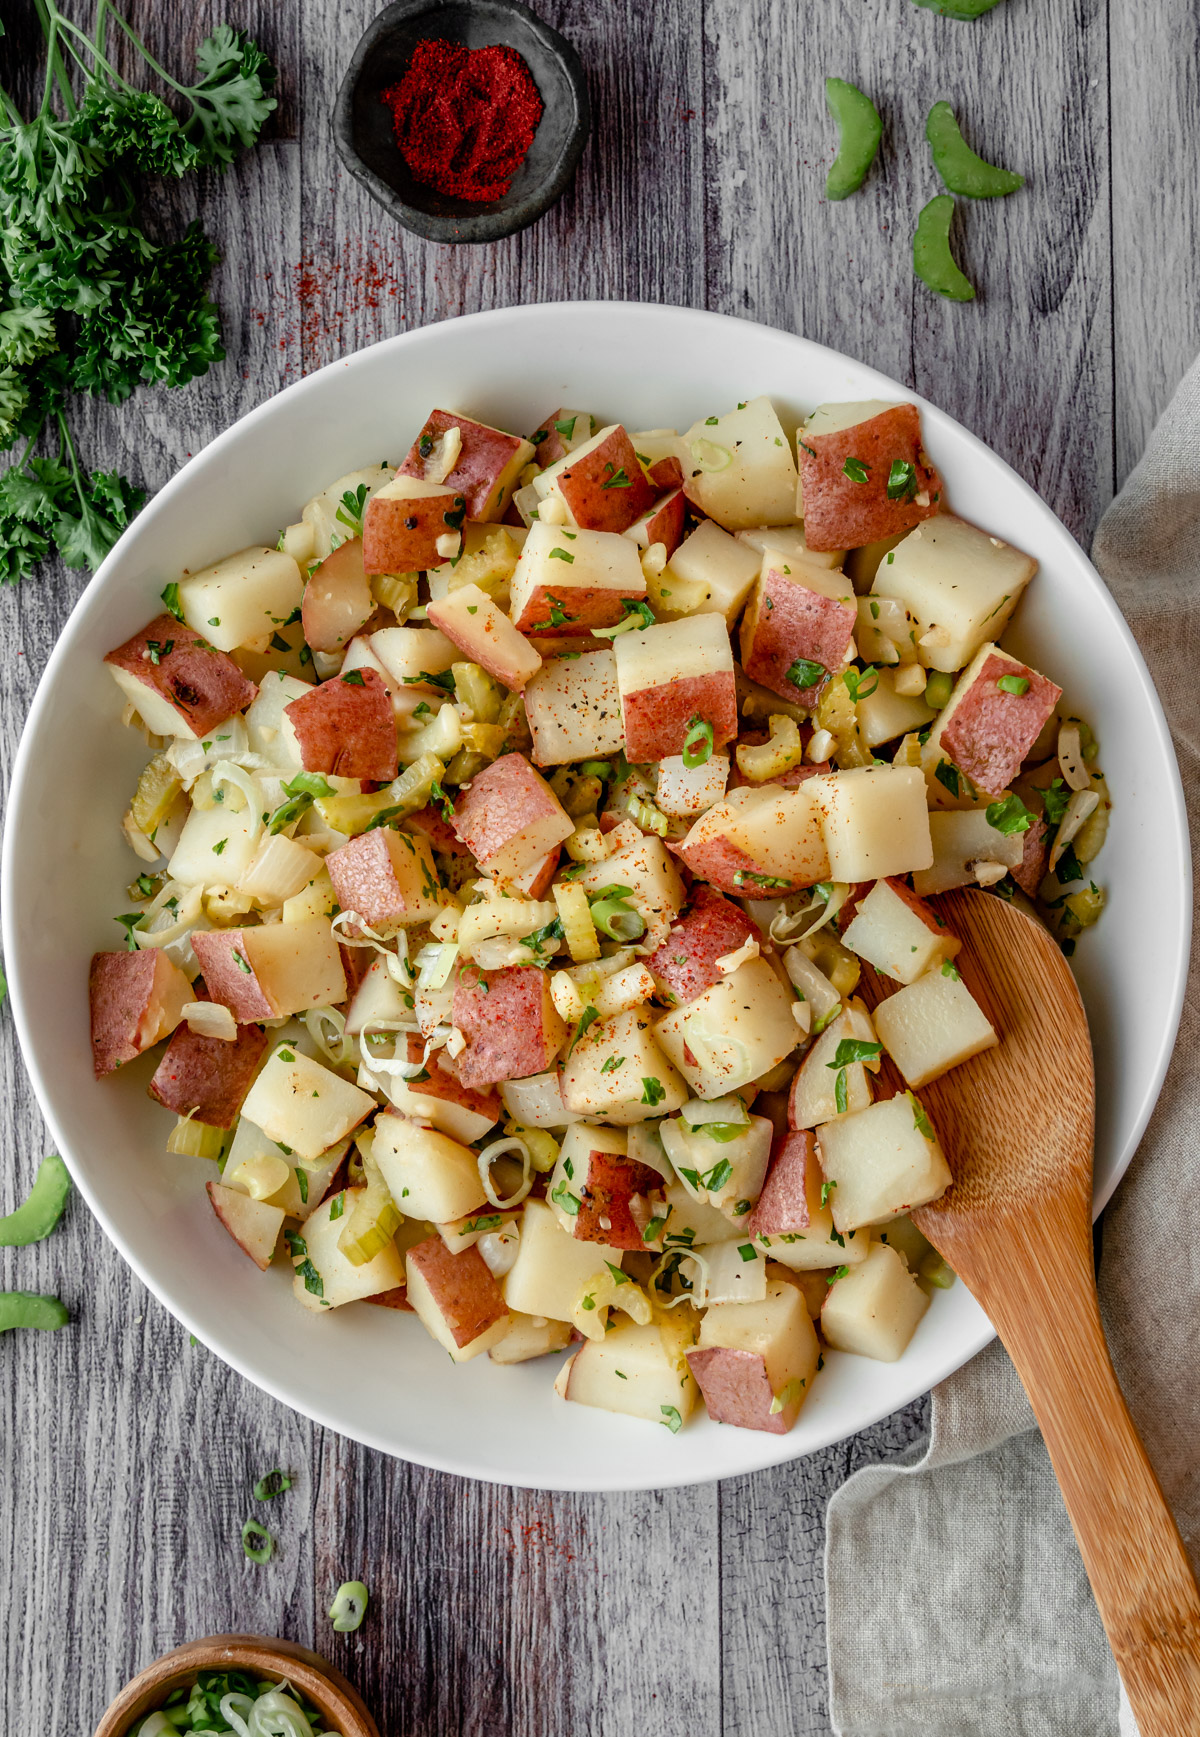 Bowl of german potato salad with a wooden serving spoon and ingredients to the side.